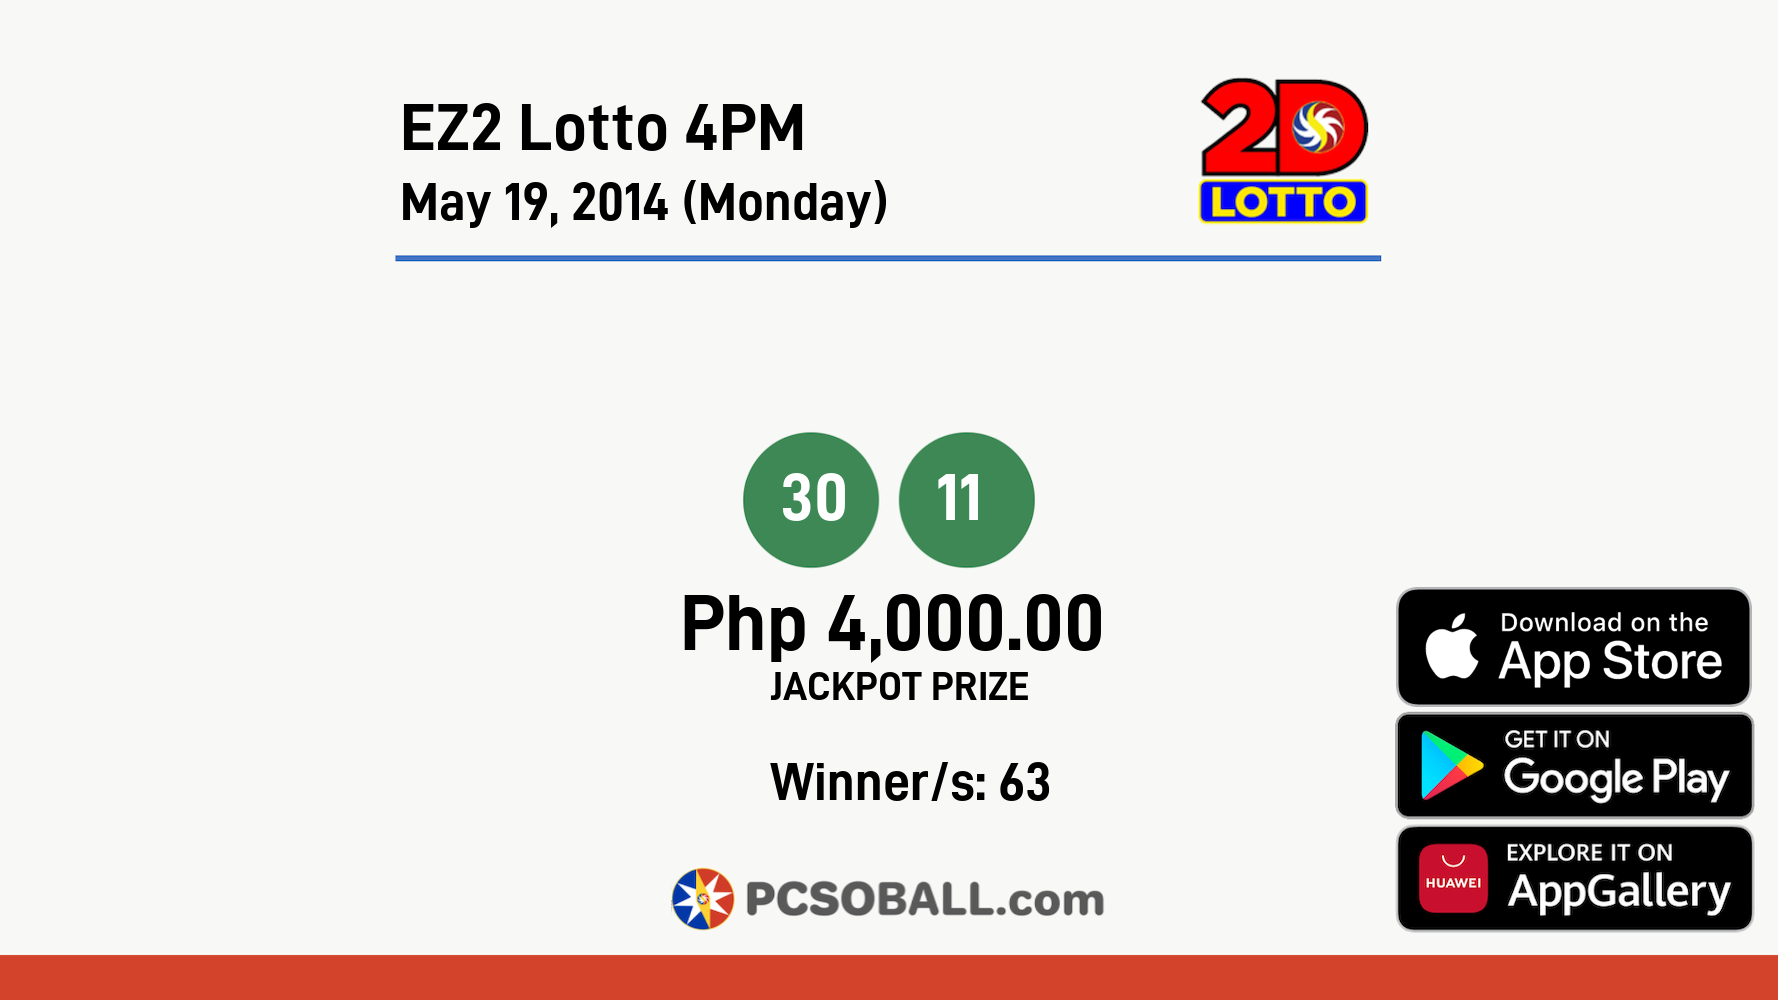 EZ2 Lotto 4PM May 19, 2014 (Monday) Result